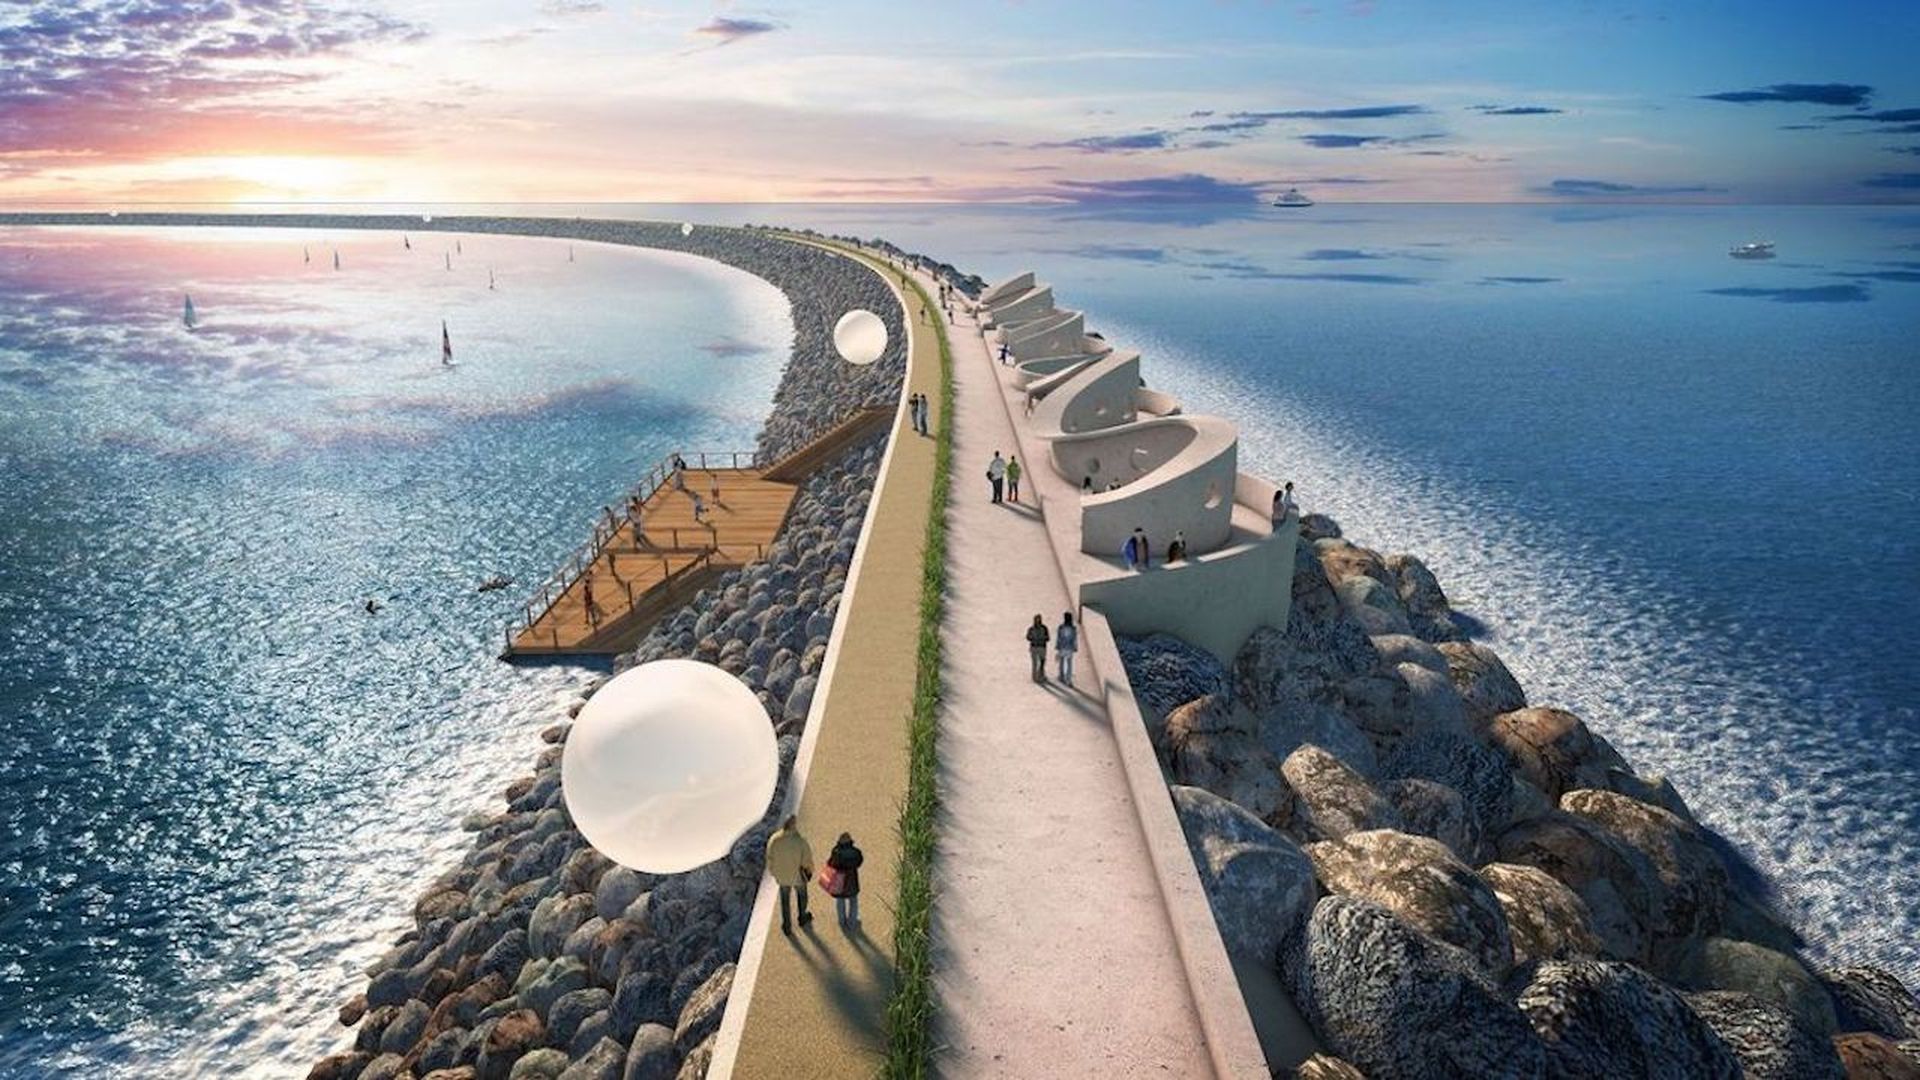 A rendering of the Swansea Tidal Lagoon project. Image: Tidal Lagoon Power via PA Wire